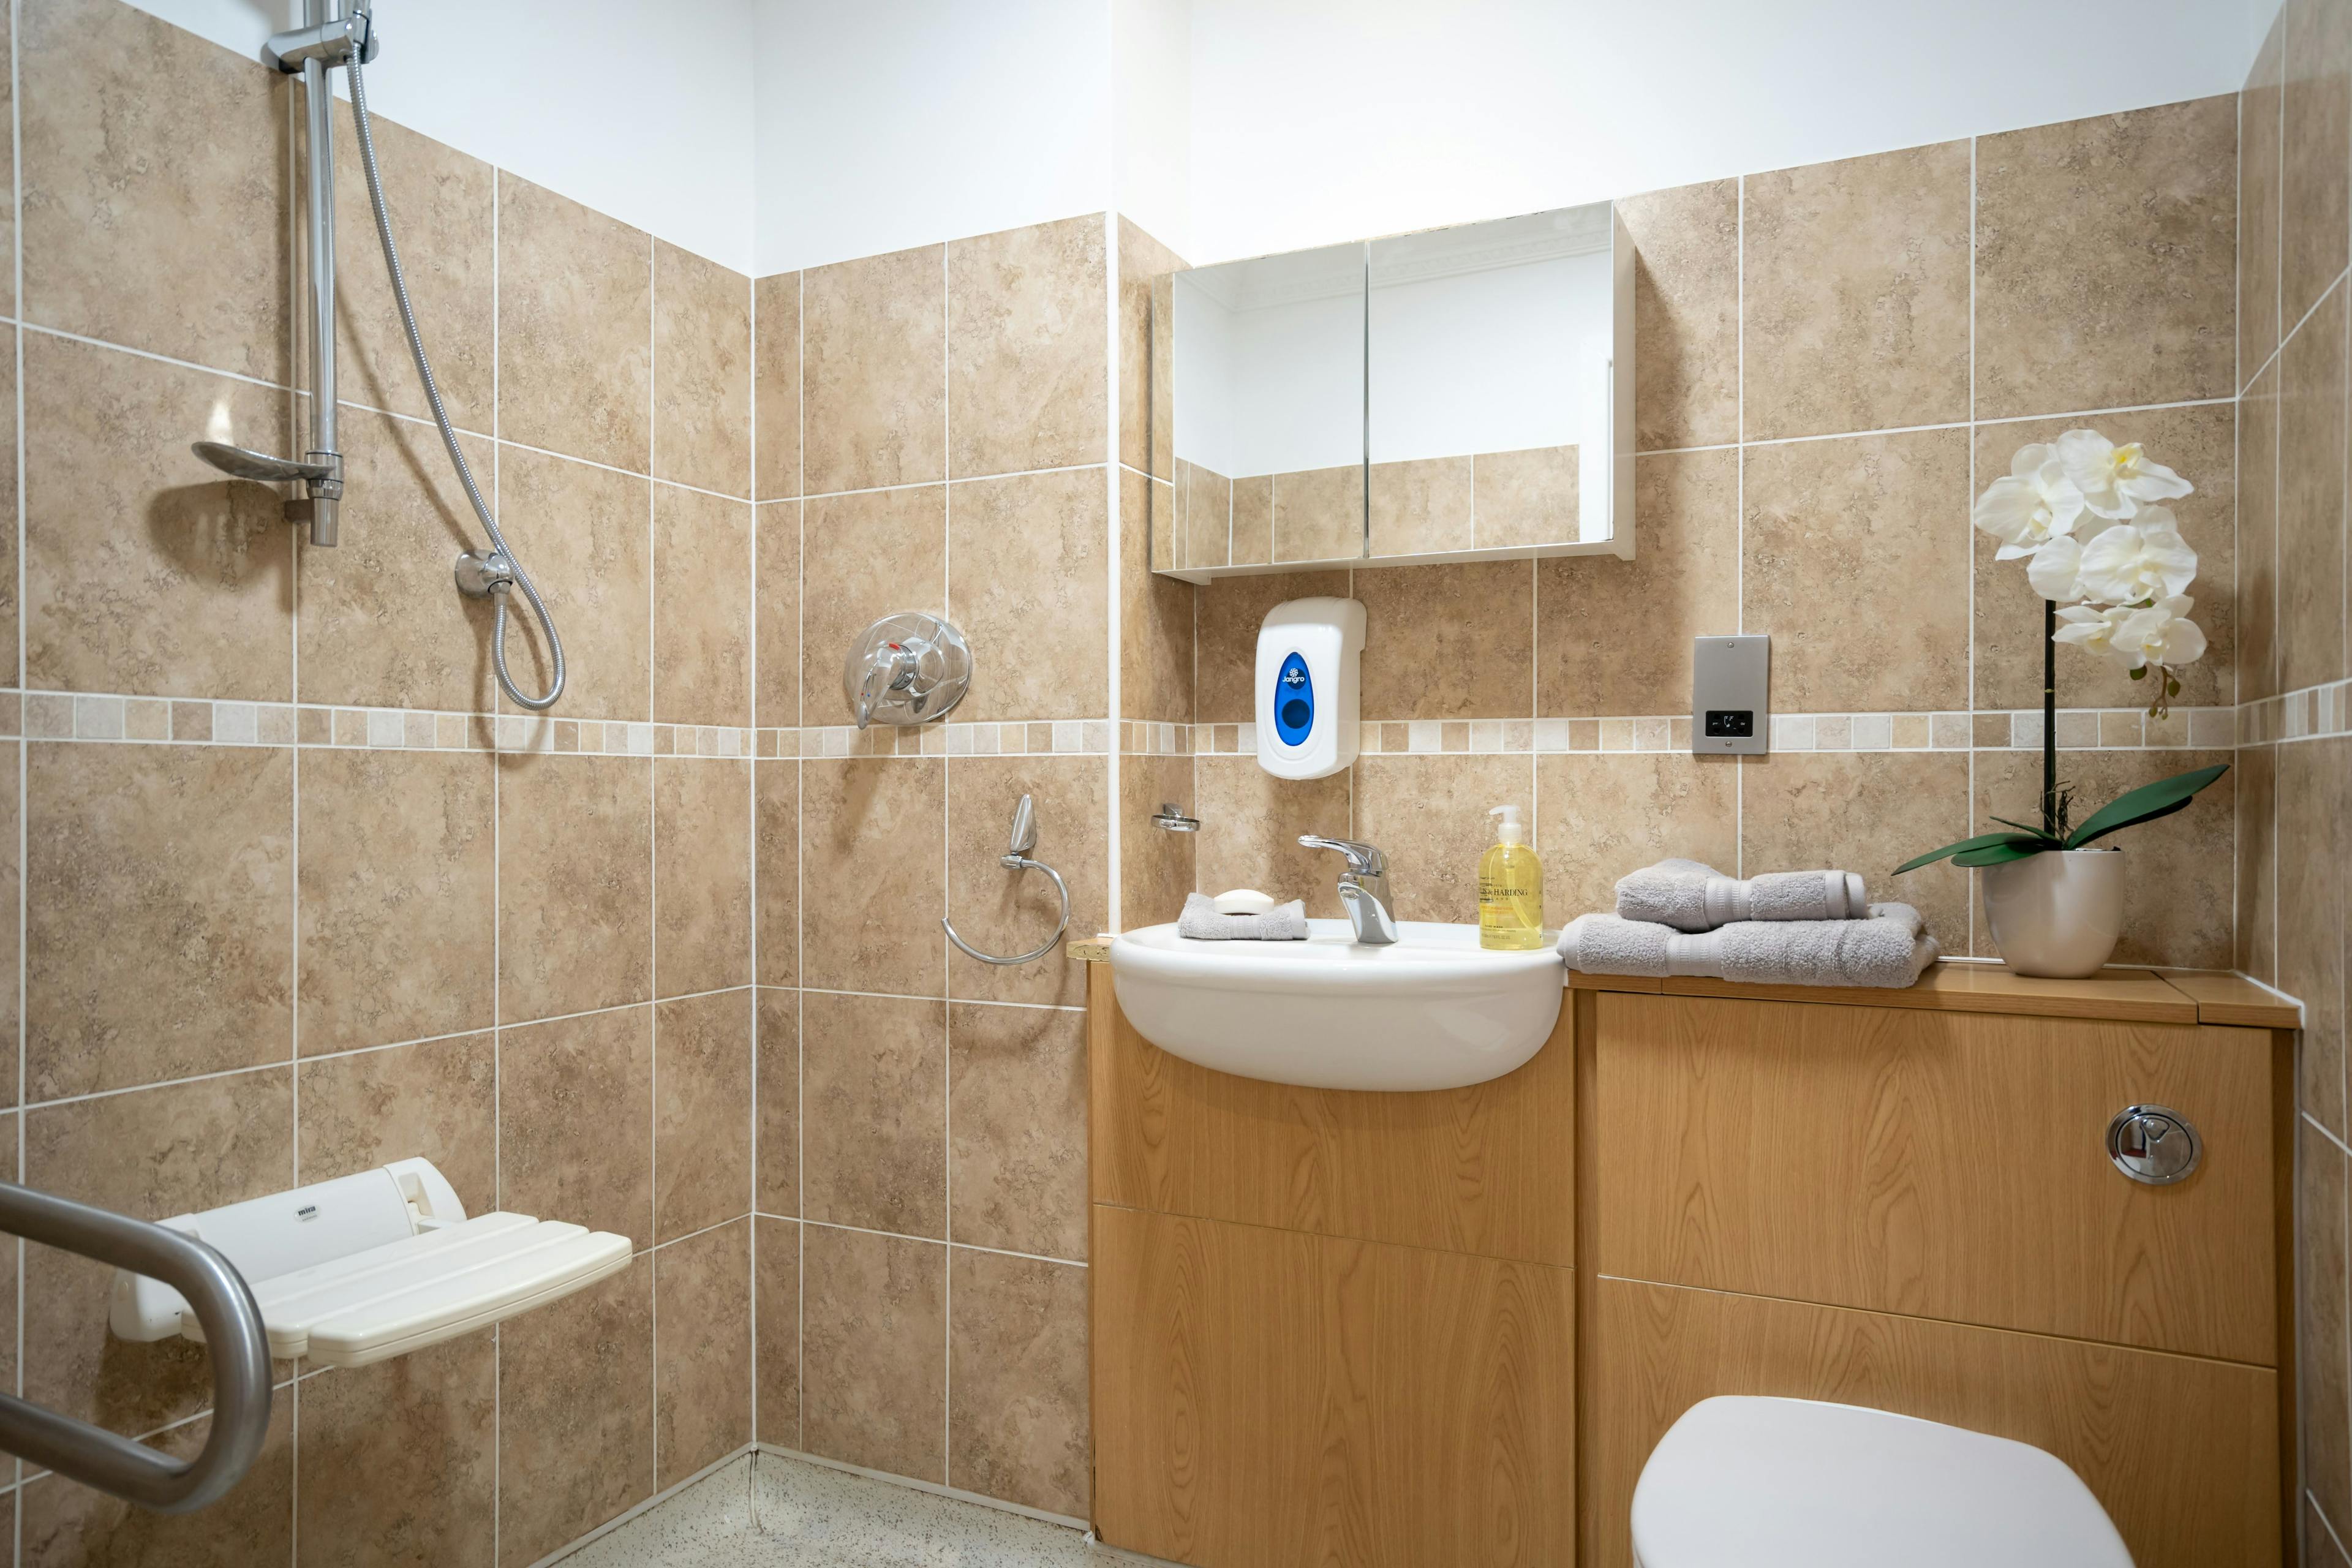 Bathroom of Aranlow House Care Home in Poole, Dorset